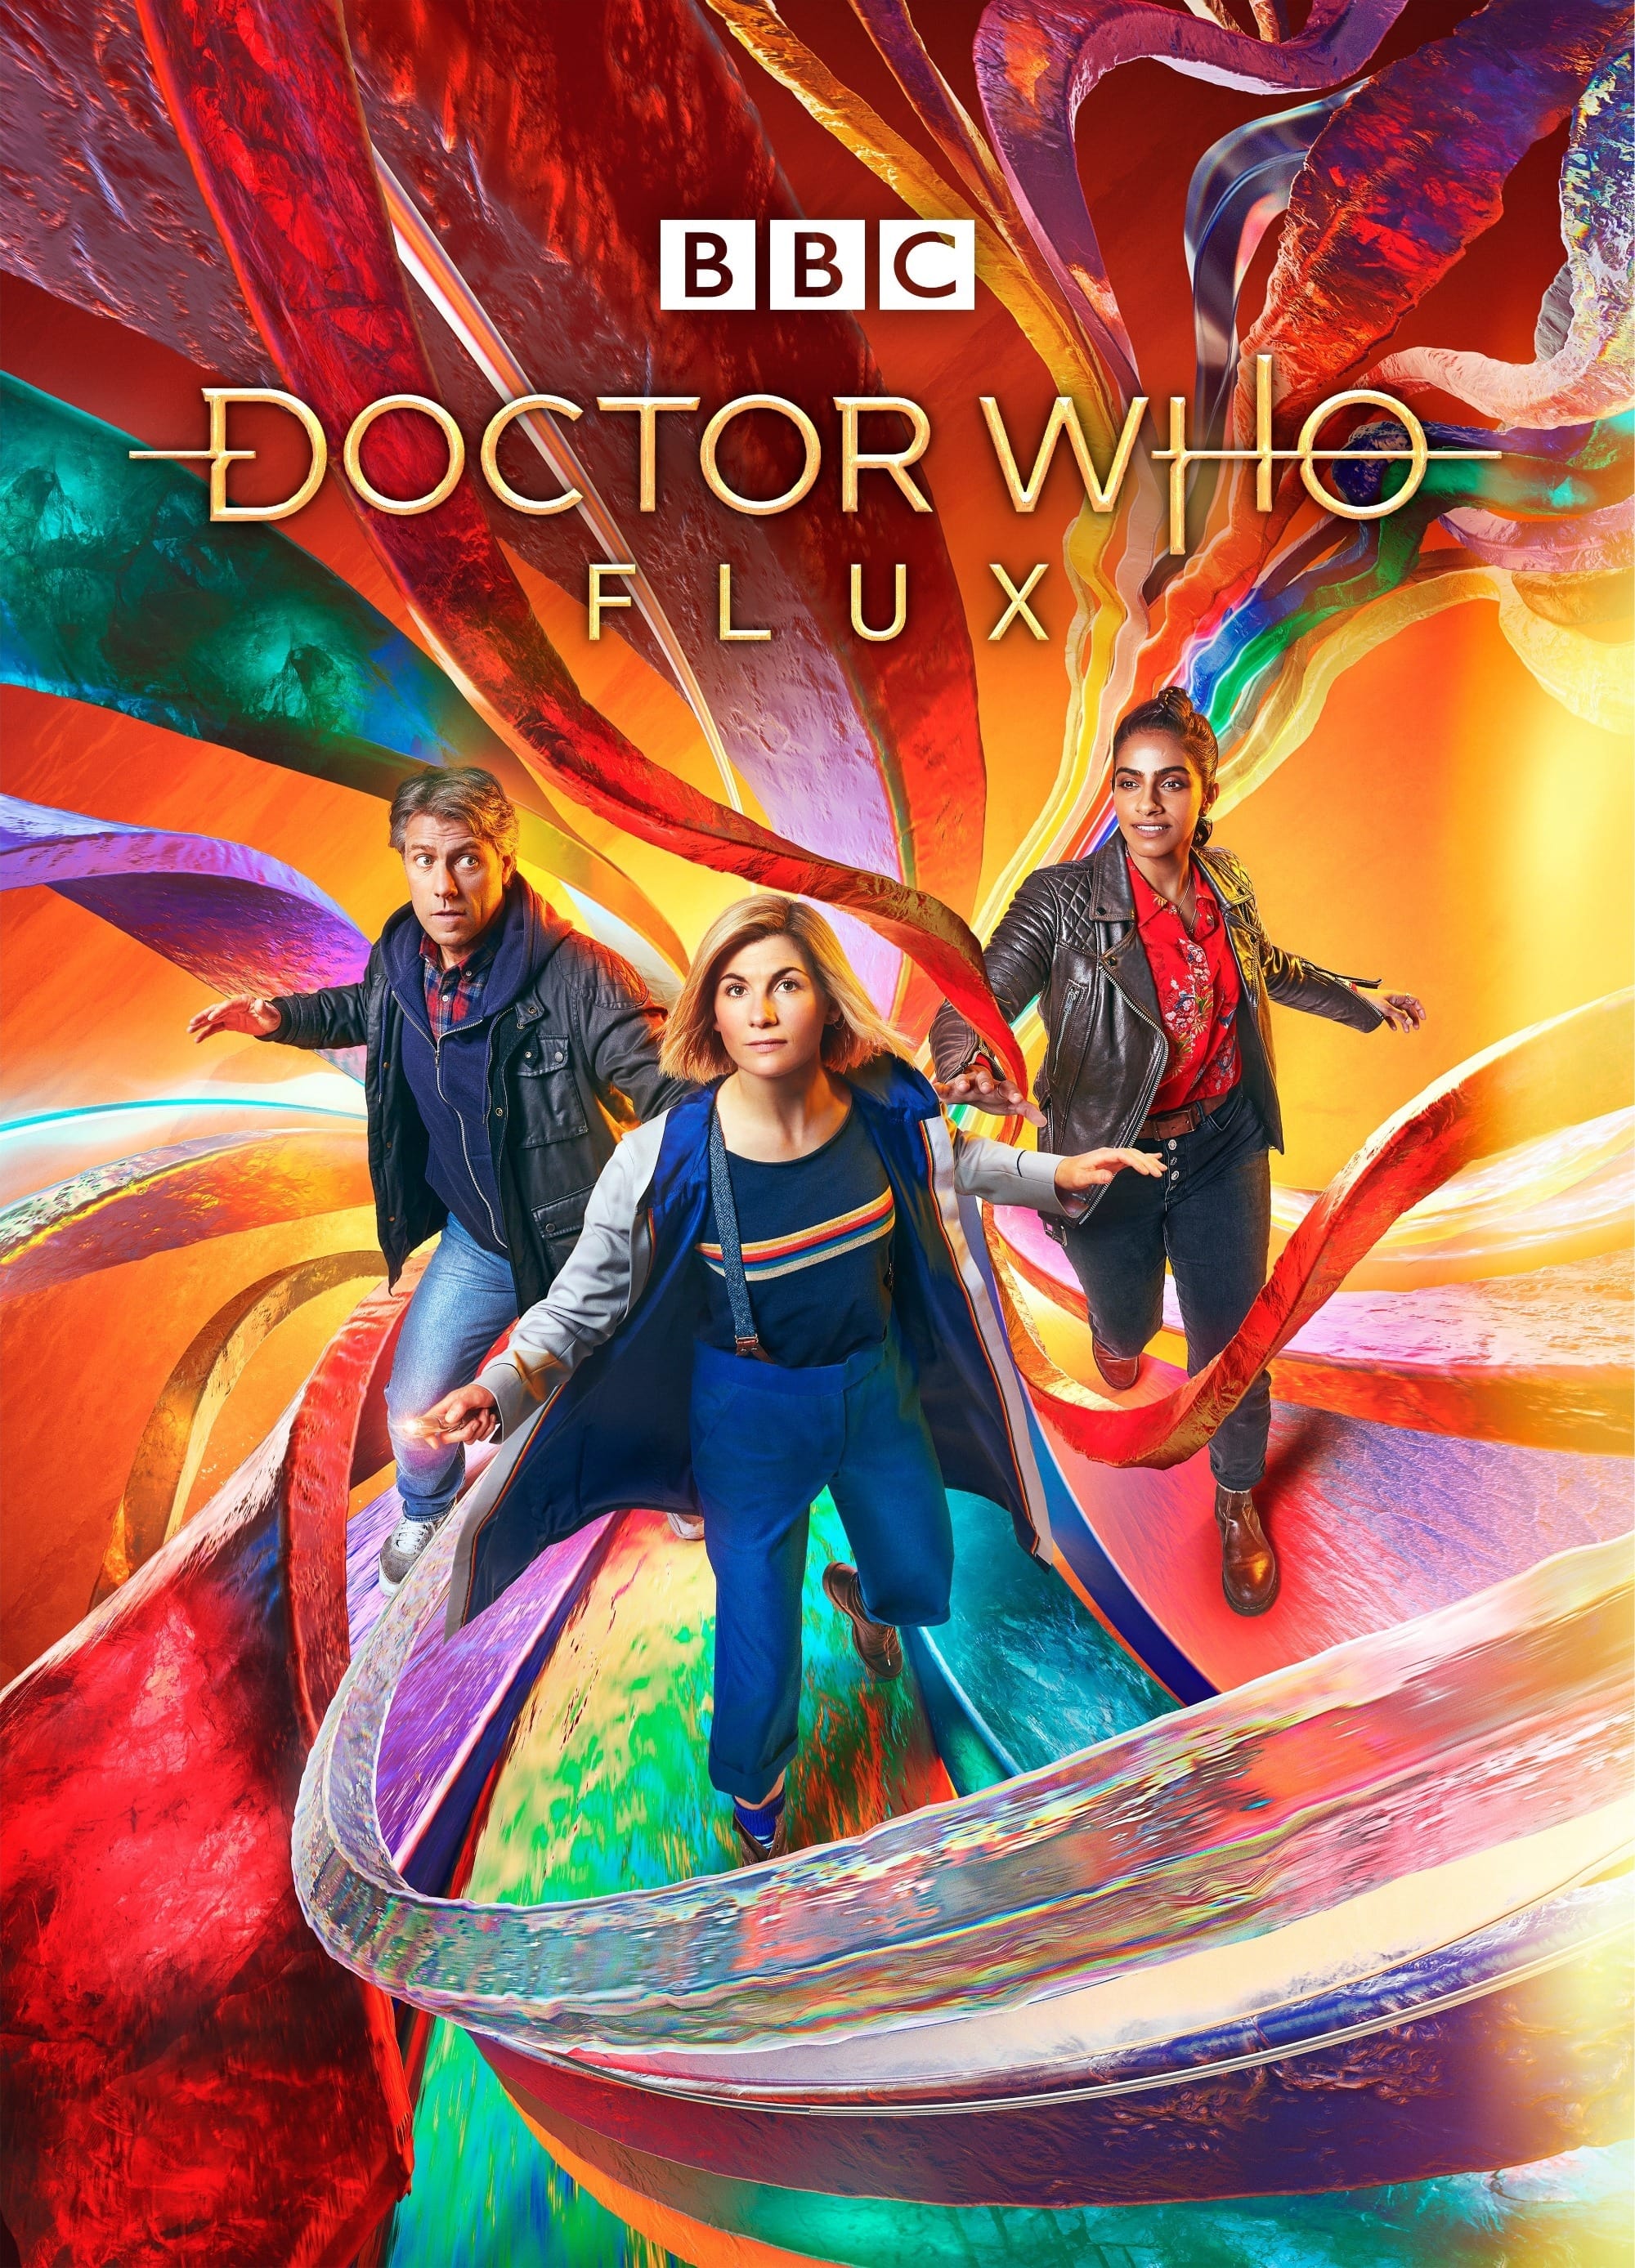 Doctor Who: Flux TV Shows About Time Travel